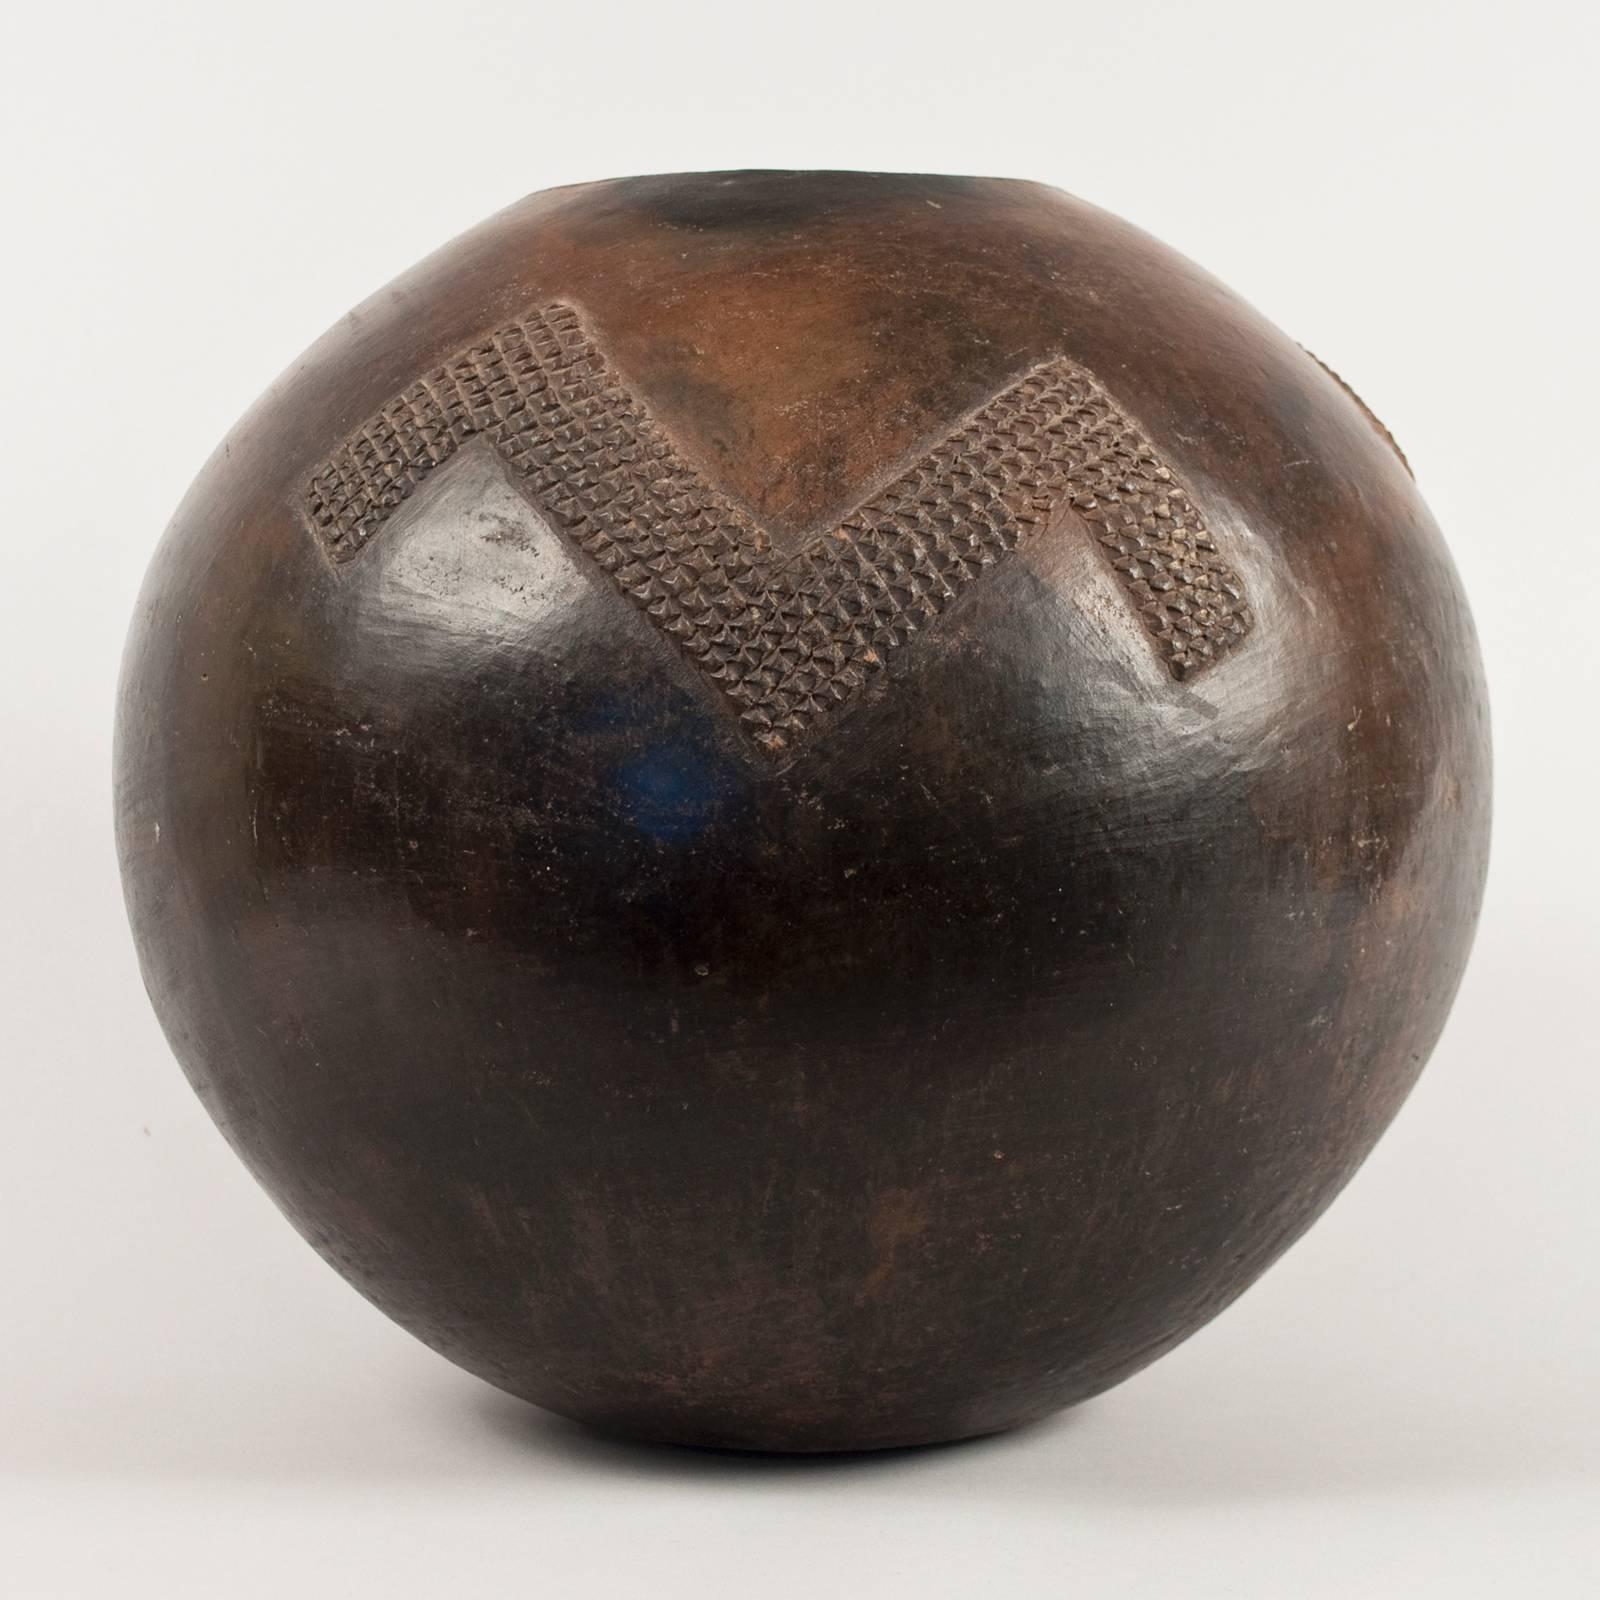 Tribal Mid-20th Century Zulu Ceramic Beer Pot, South Africa